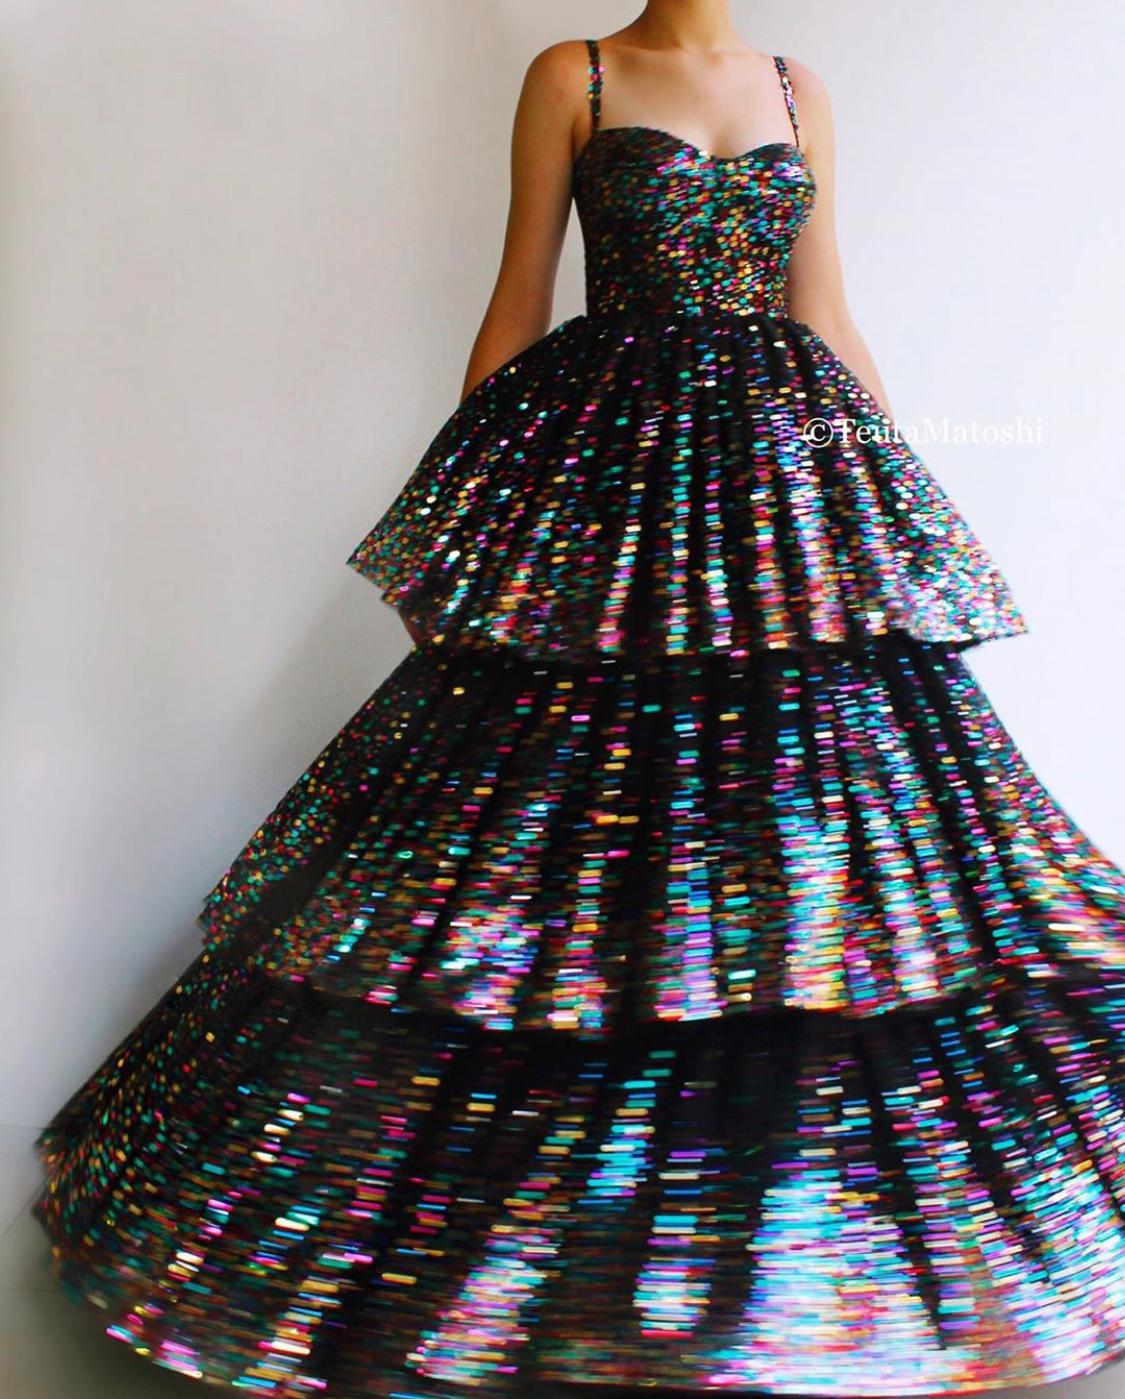 Black A-Line dress with spaghetti straps and sequins